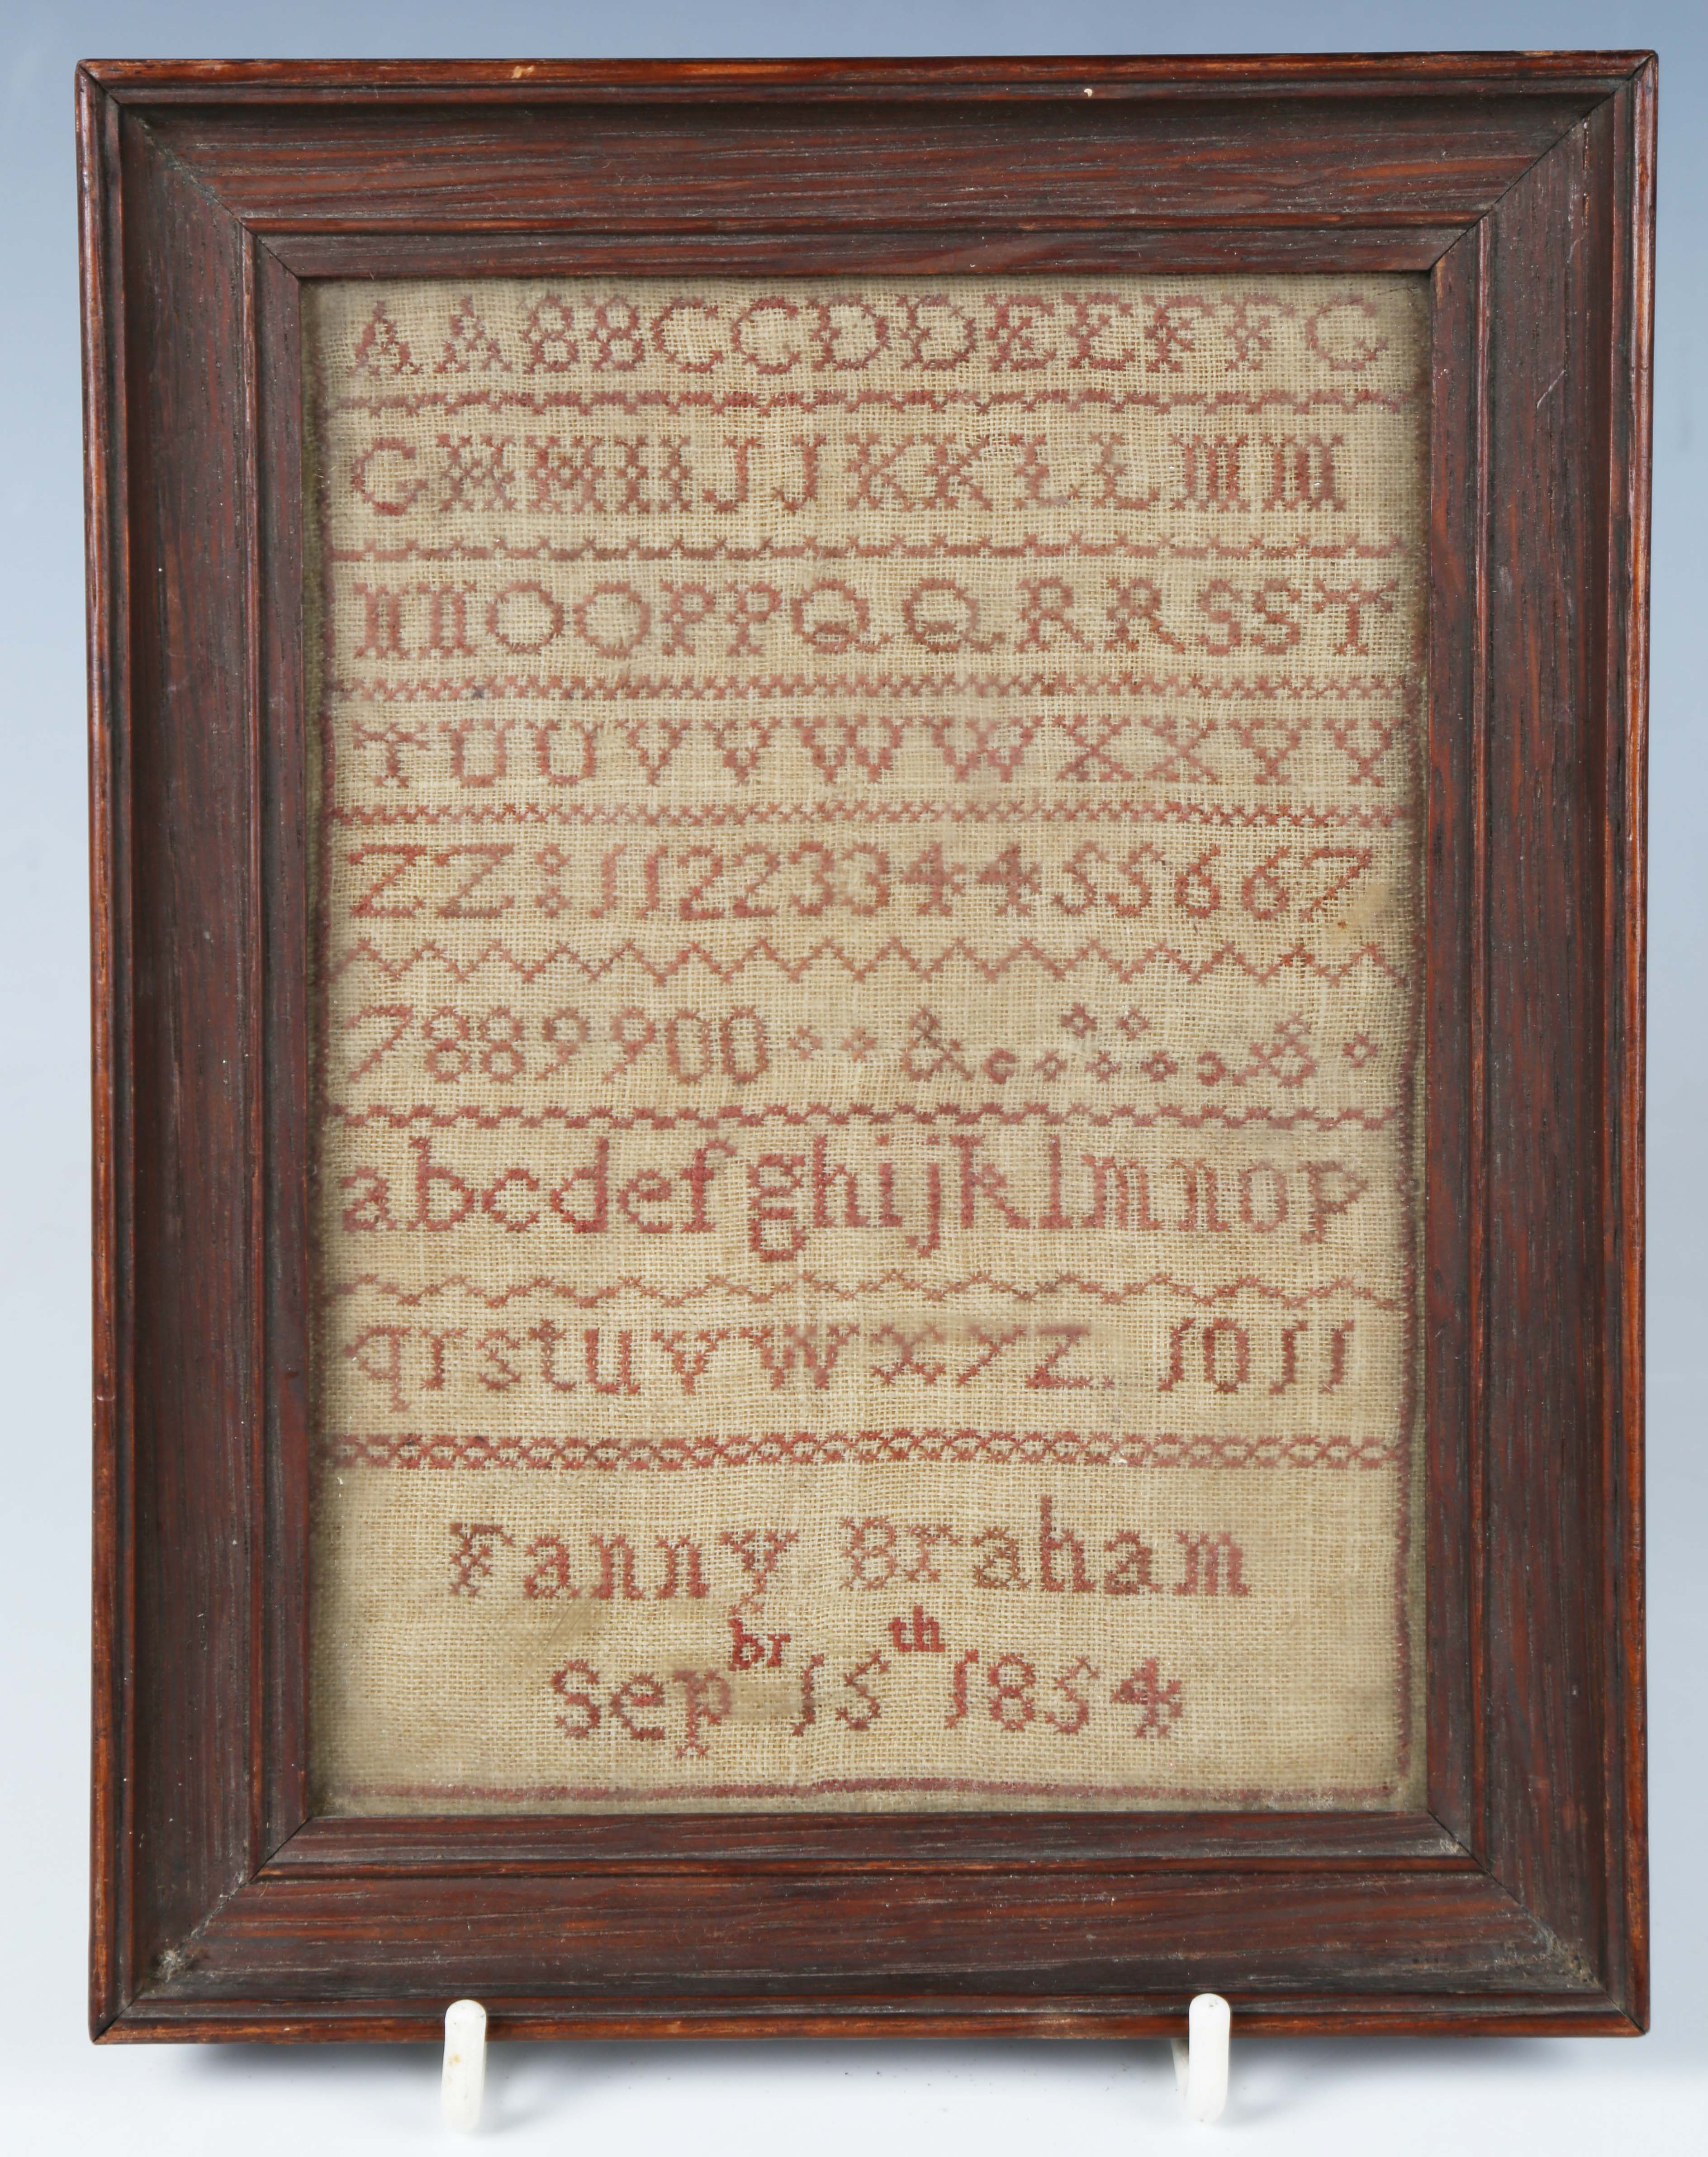 An early Victorian needlework sampler by Jane Constance, aged 13, dated 'January 6 1839', finely - Image 3 of 14